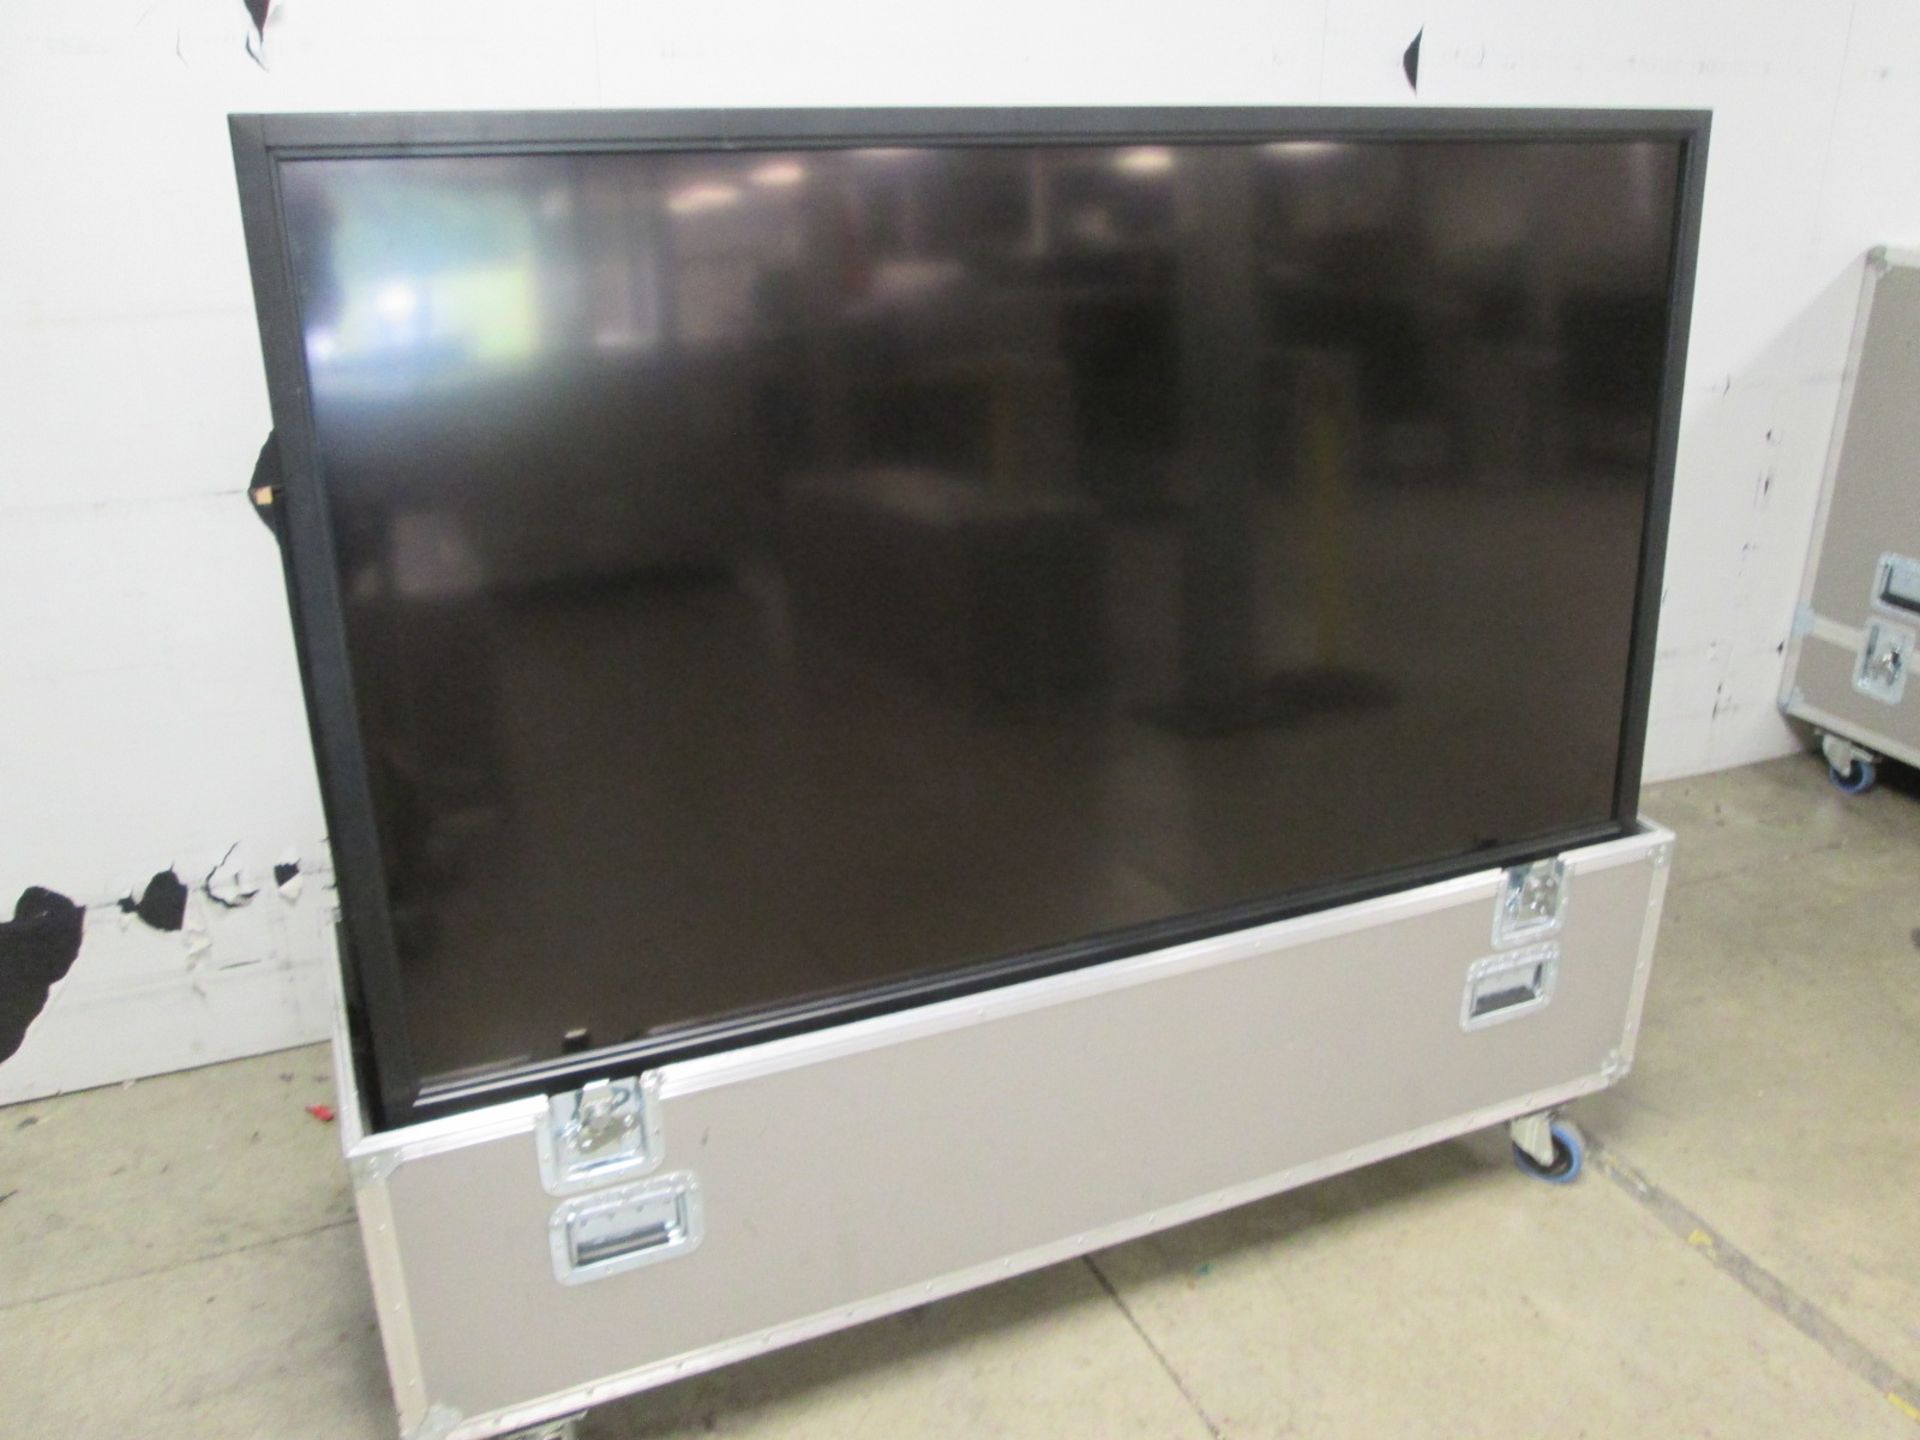 Sharp 70" LCD Colour Monitor, Model PN-E702, S/N 4C000589, In flight case with backplate and remote